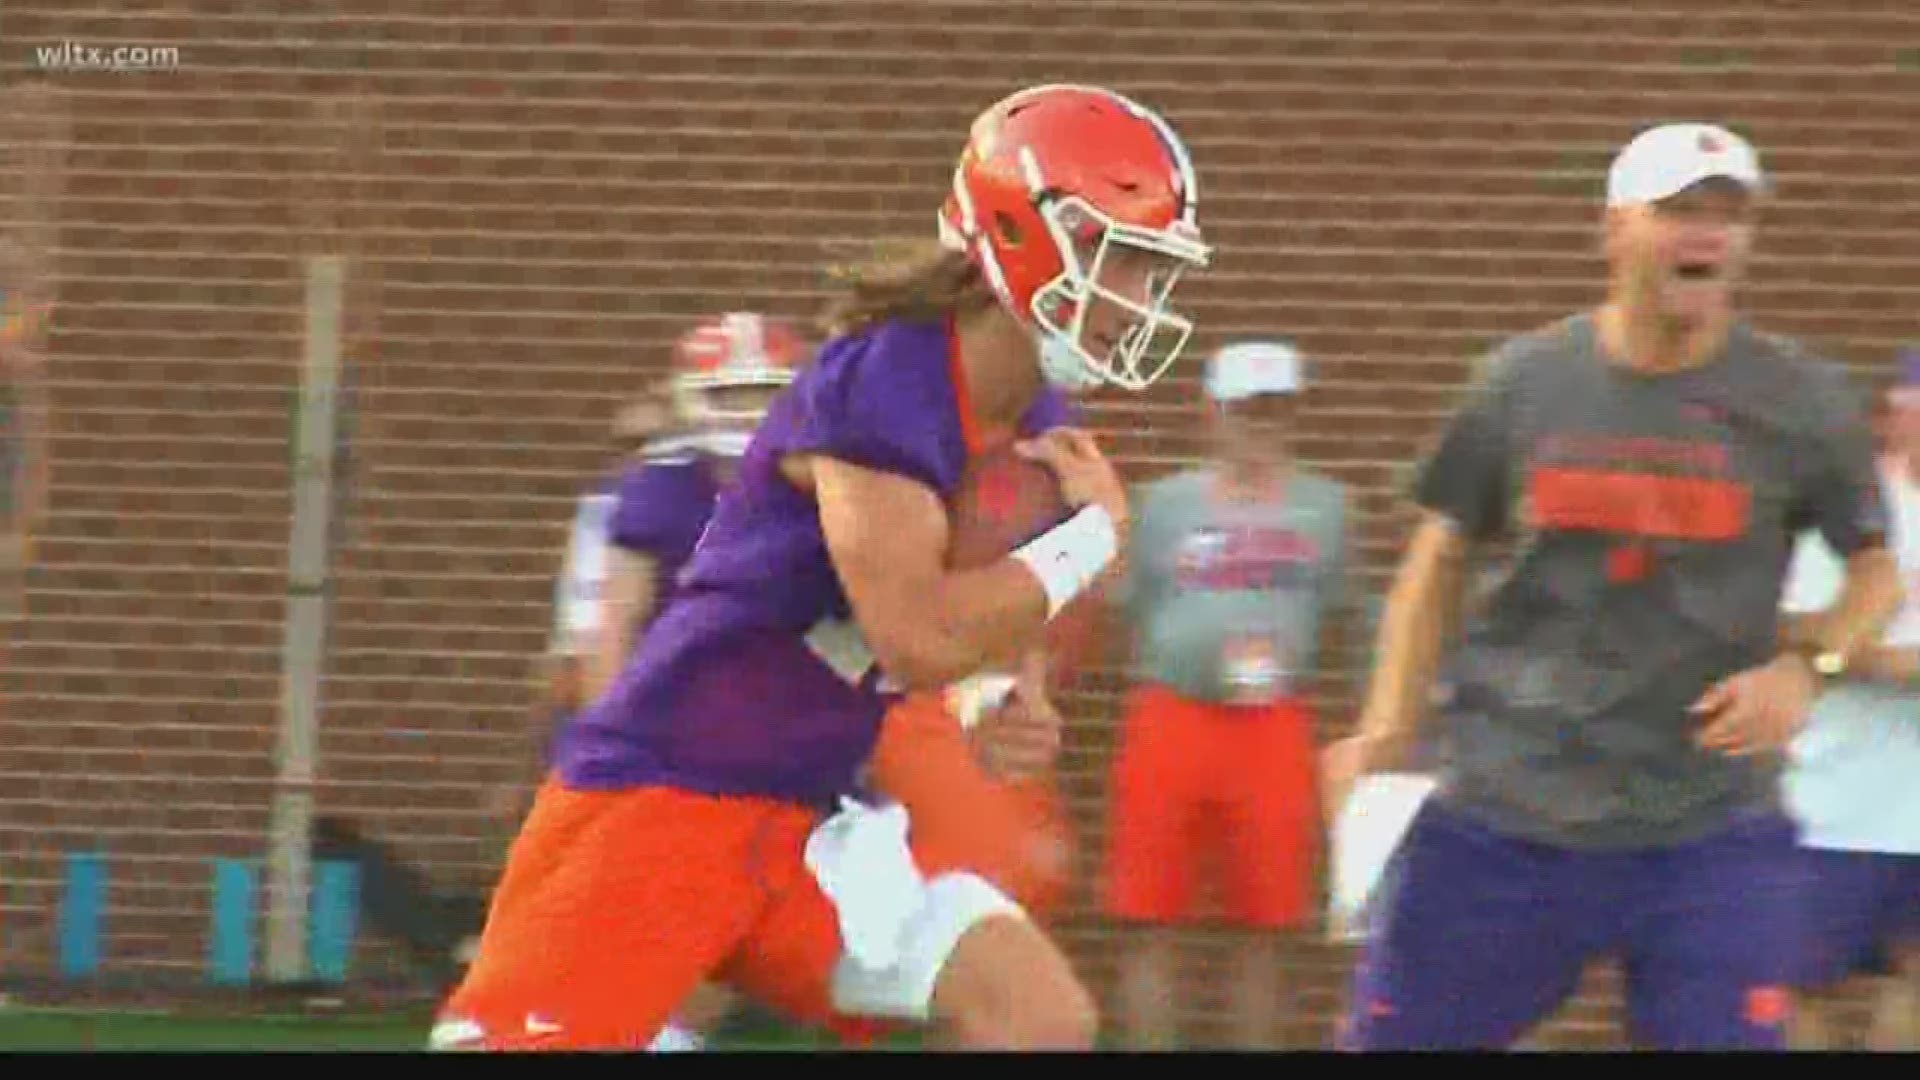 For another year at Clemson camp questions loom around the quarterback position. Will it be returning starter Kelly Bryant or the stud freshman in Trevor Lawrence. According to the Clemson coaches only time will tell.